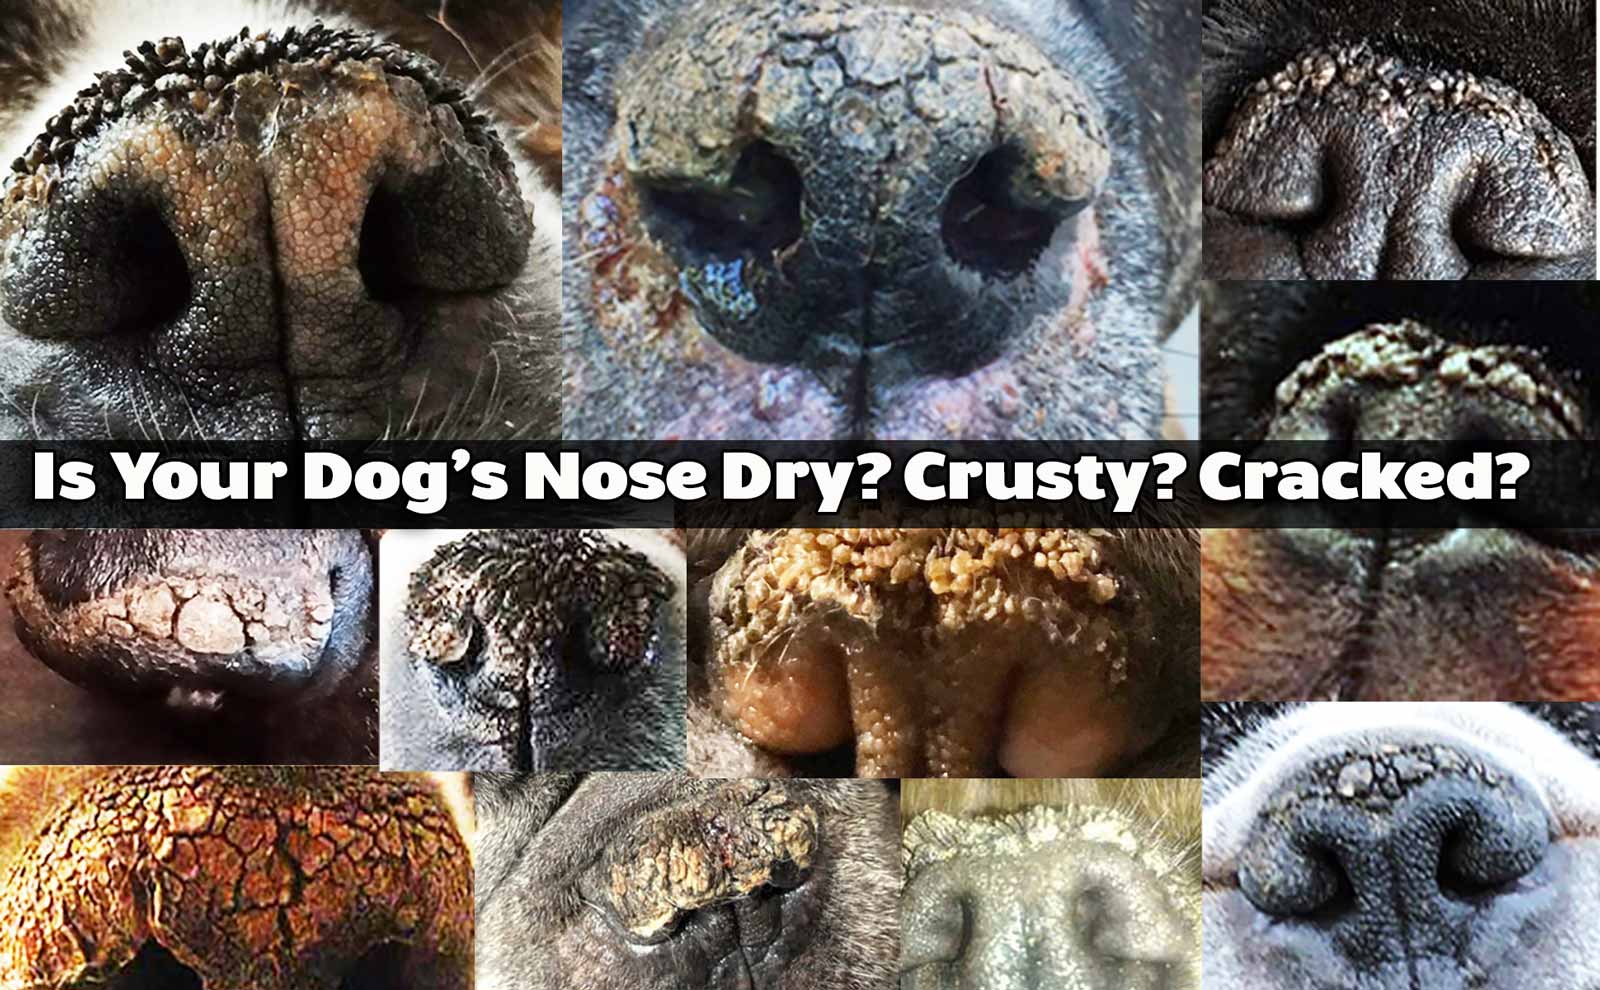 DRY dog noses